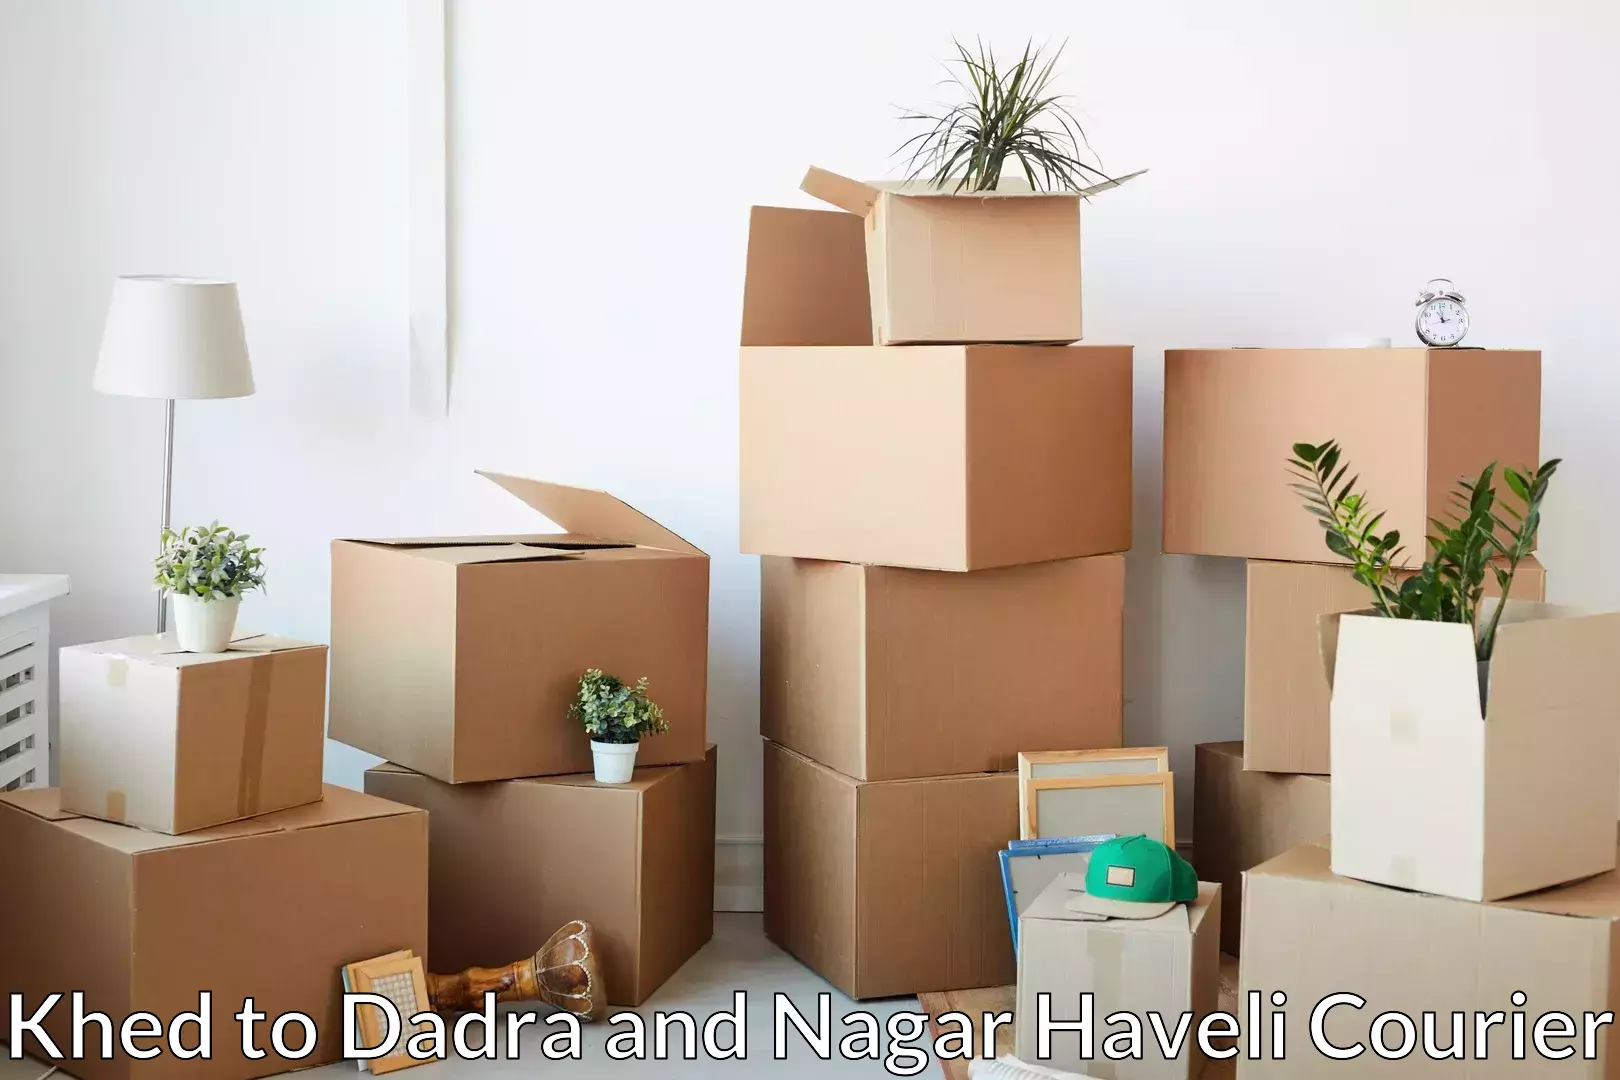 Affordable relocation services Khed to Dadra and Nagar Haveli